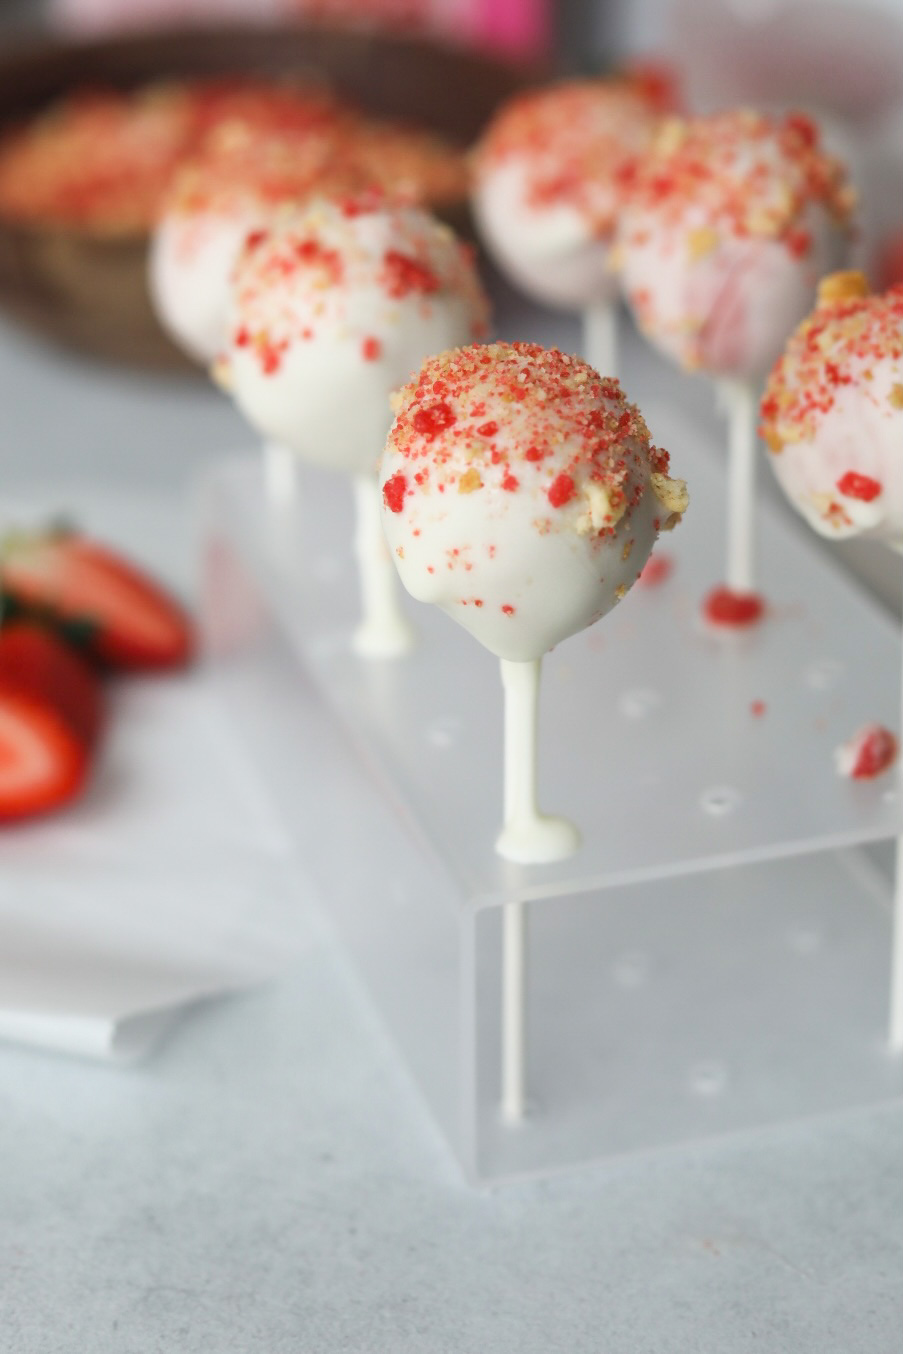 Six strawberry cake pops in a clear cake pop stand. One halved strawberry added for styling purposes on the right side of the cake pops. Two wooden bowls out of focus in the background added for styling purposes filled with strawberry crunch and fresh strawberries.